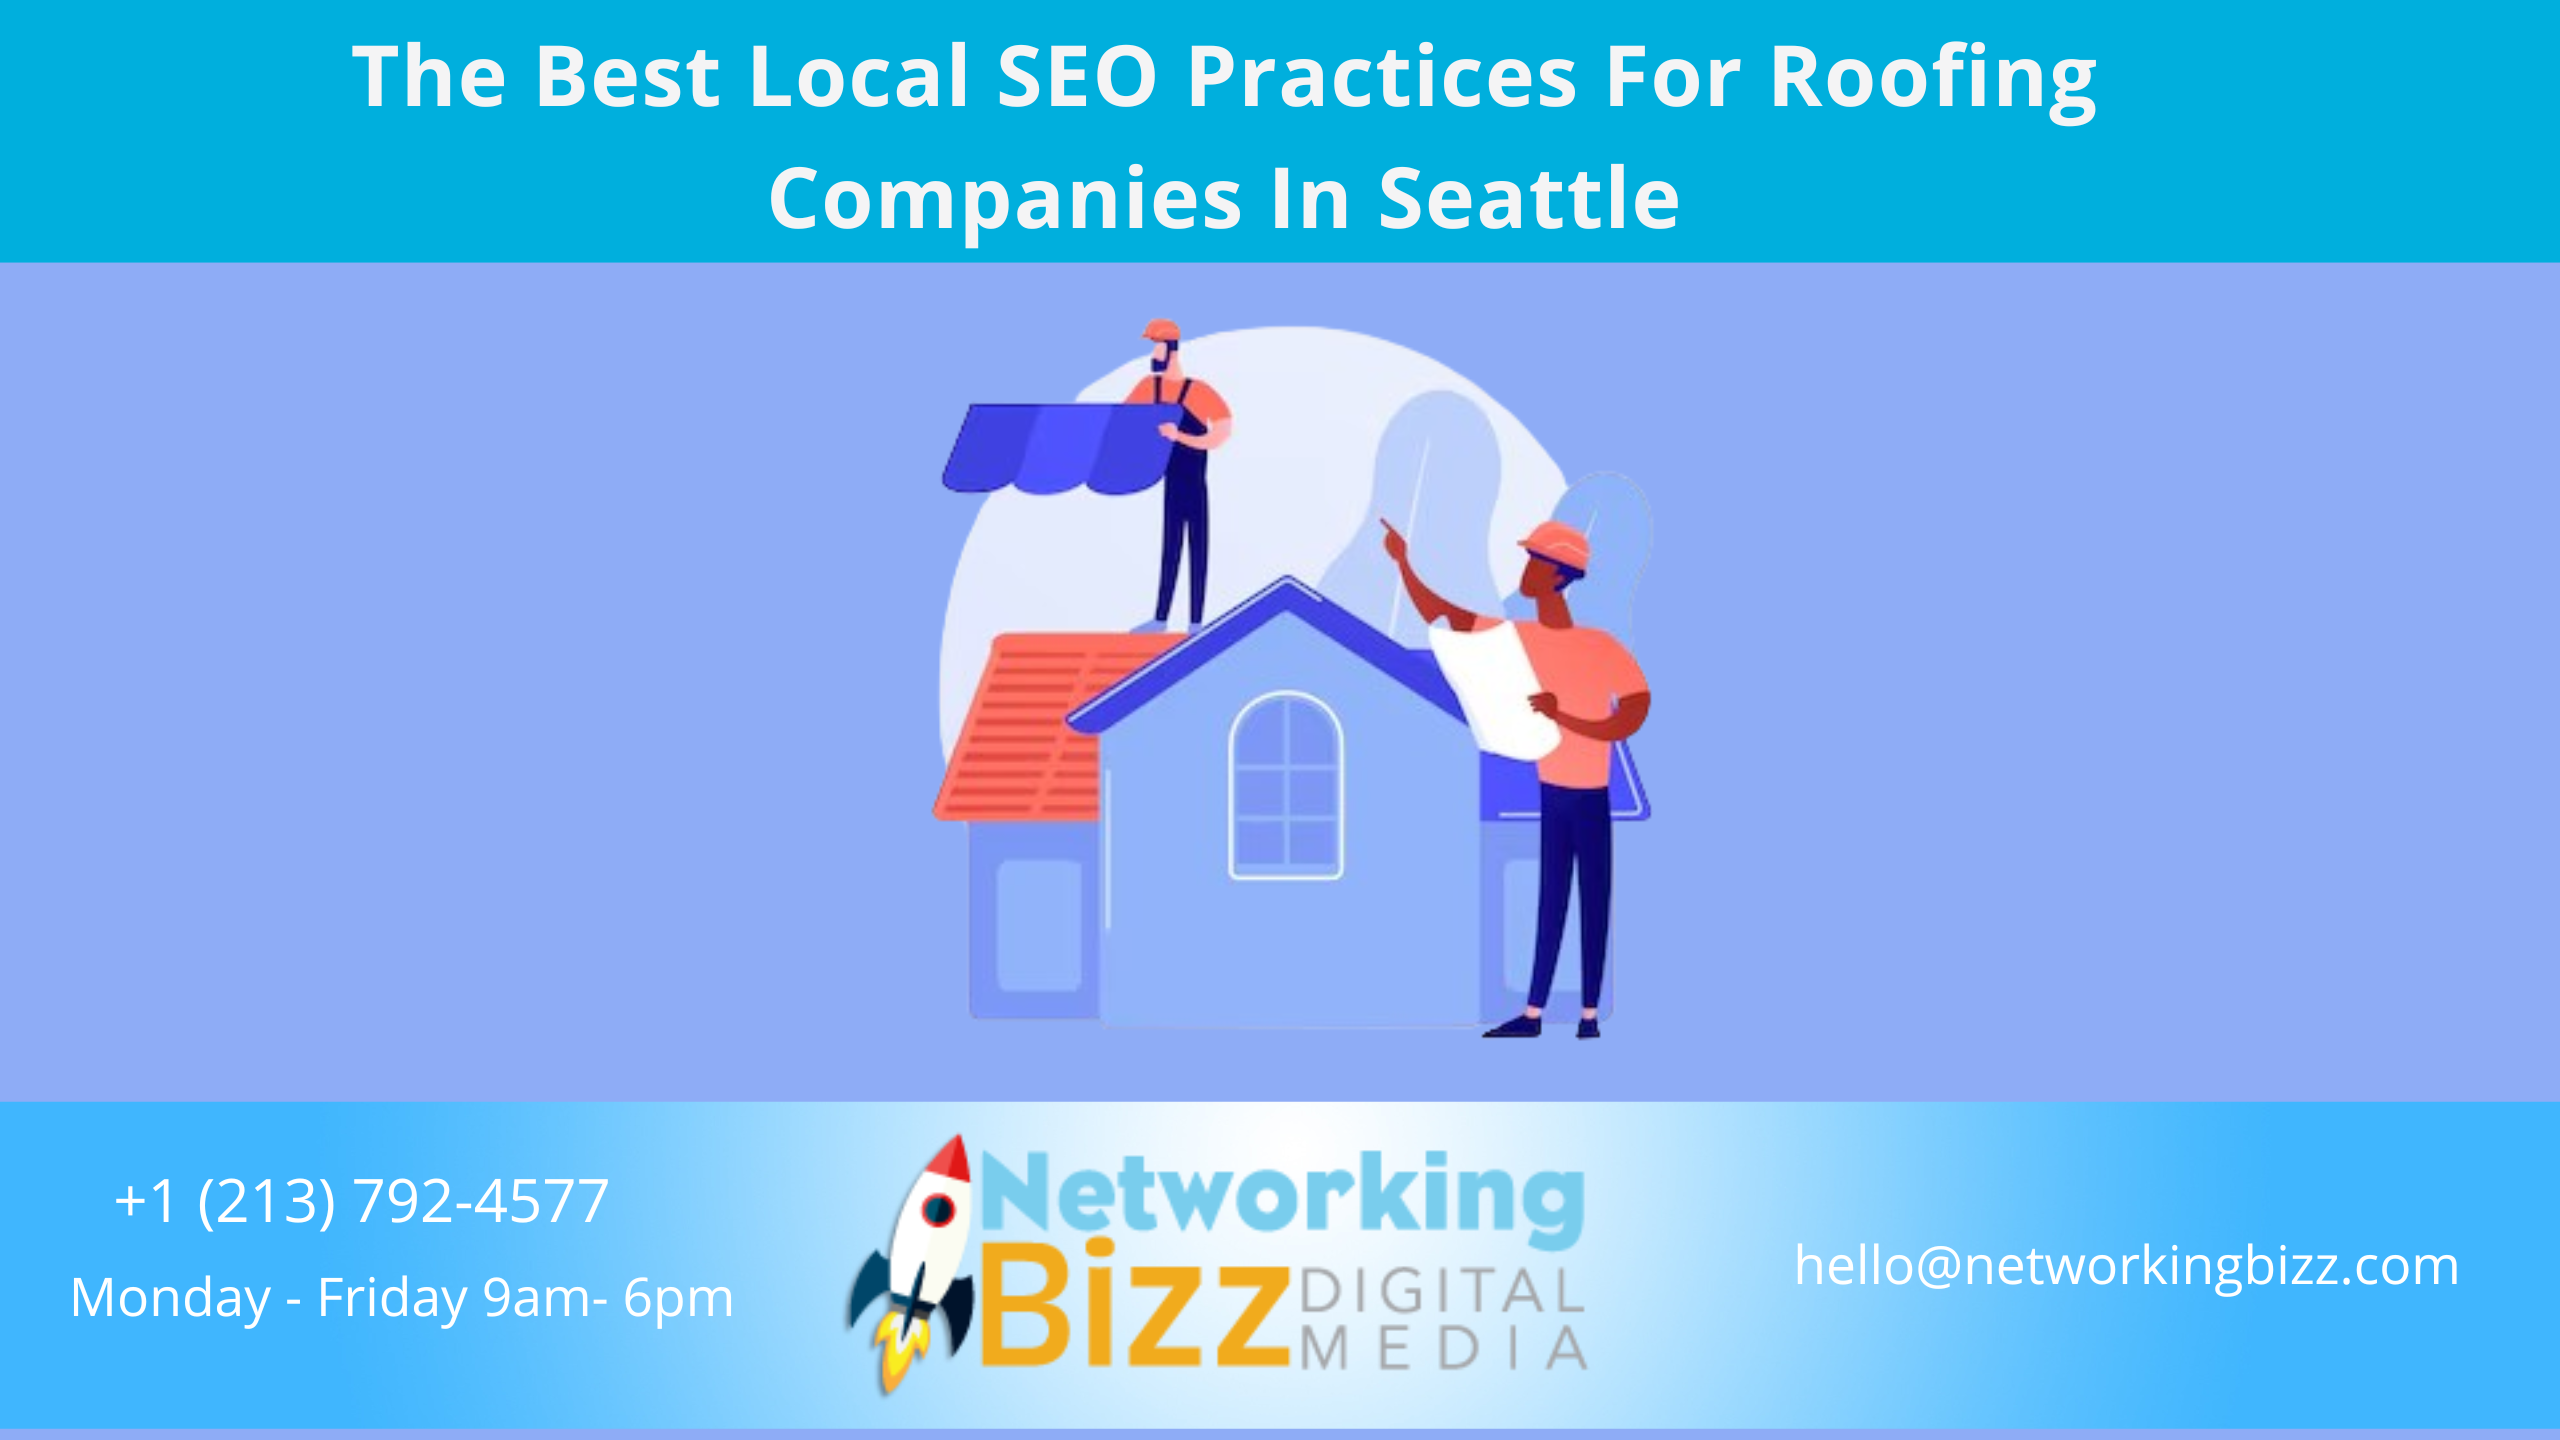 The Best Local SEO Practices For Roofing Companies In Seattle